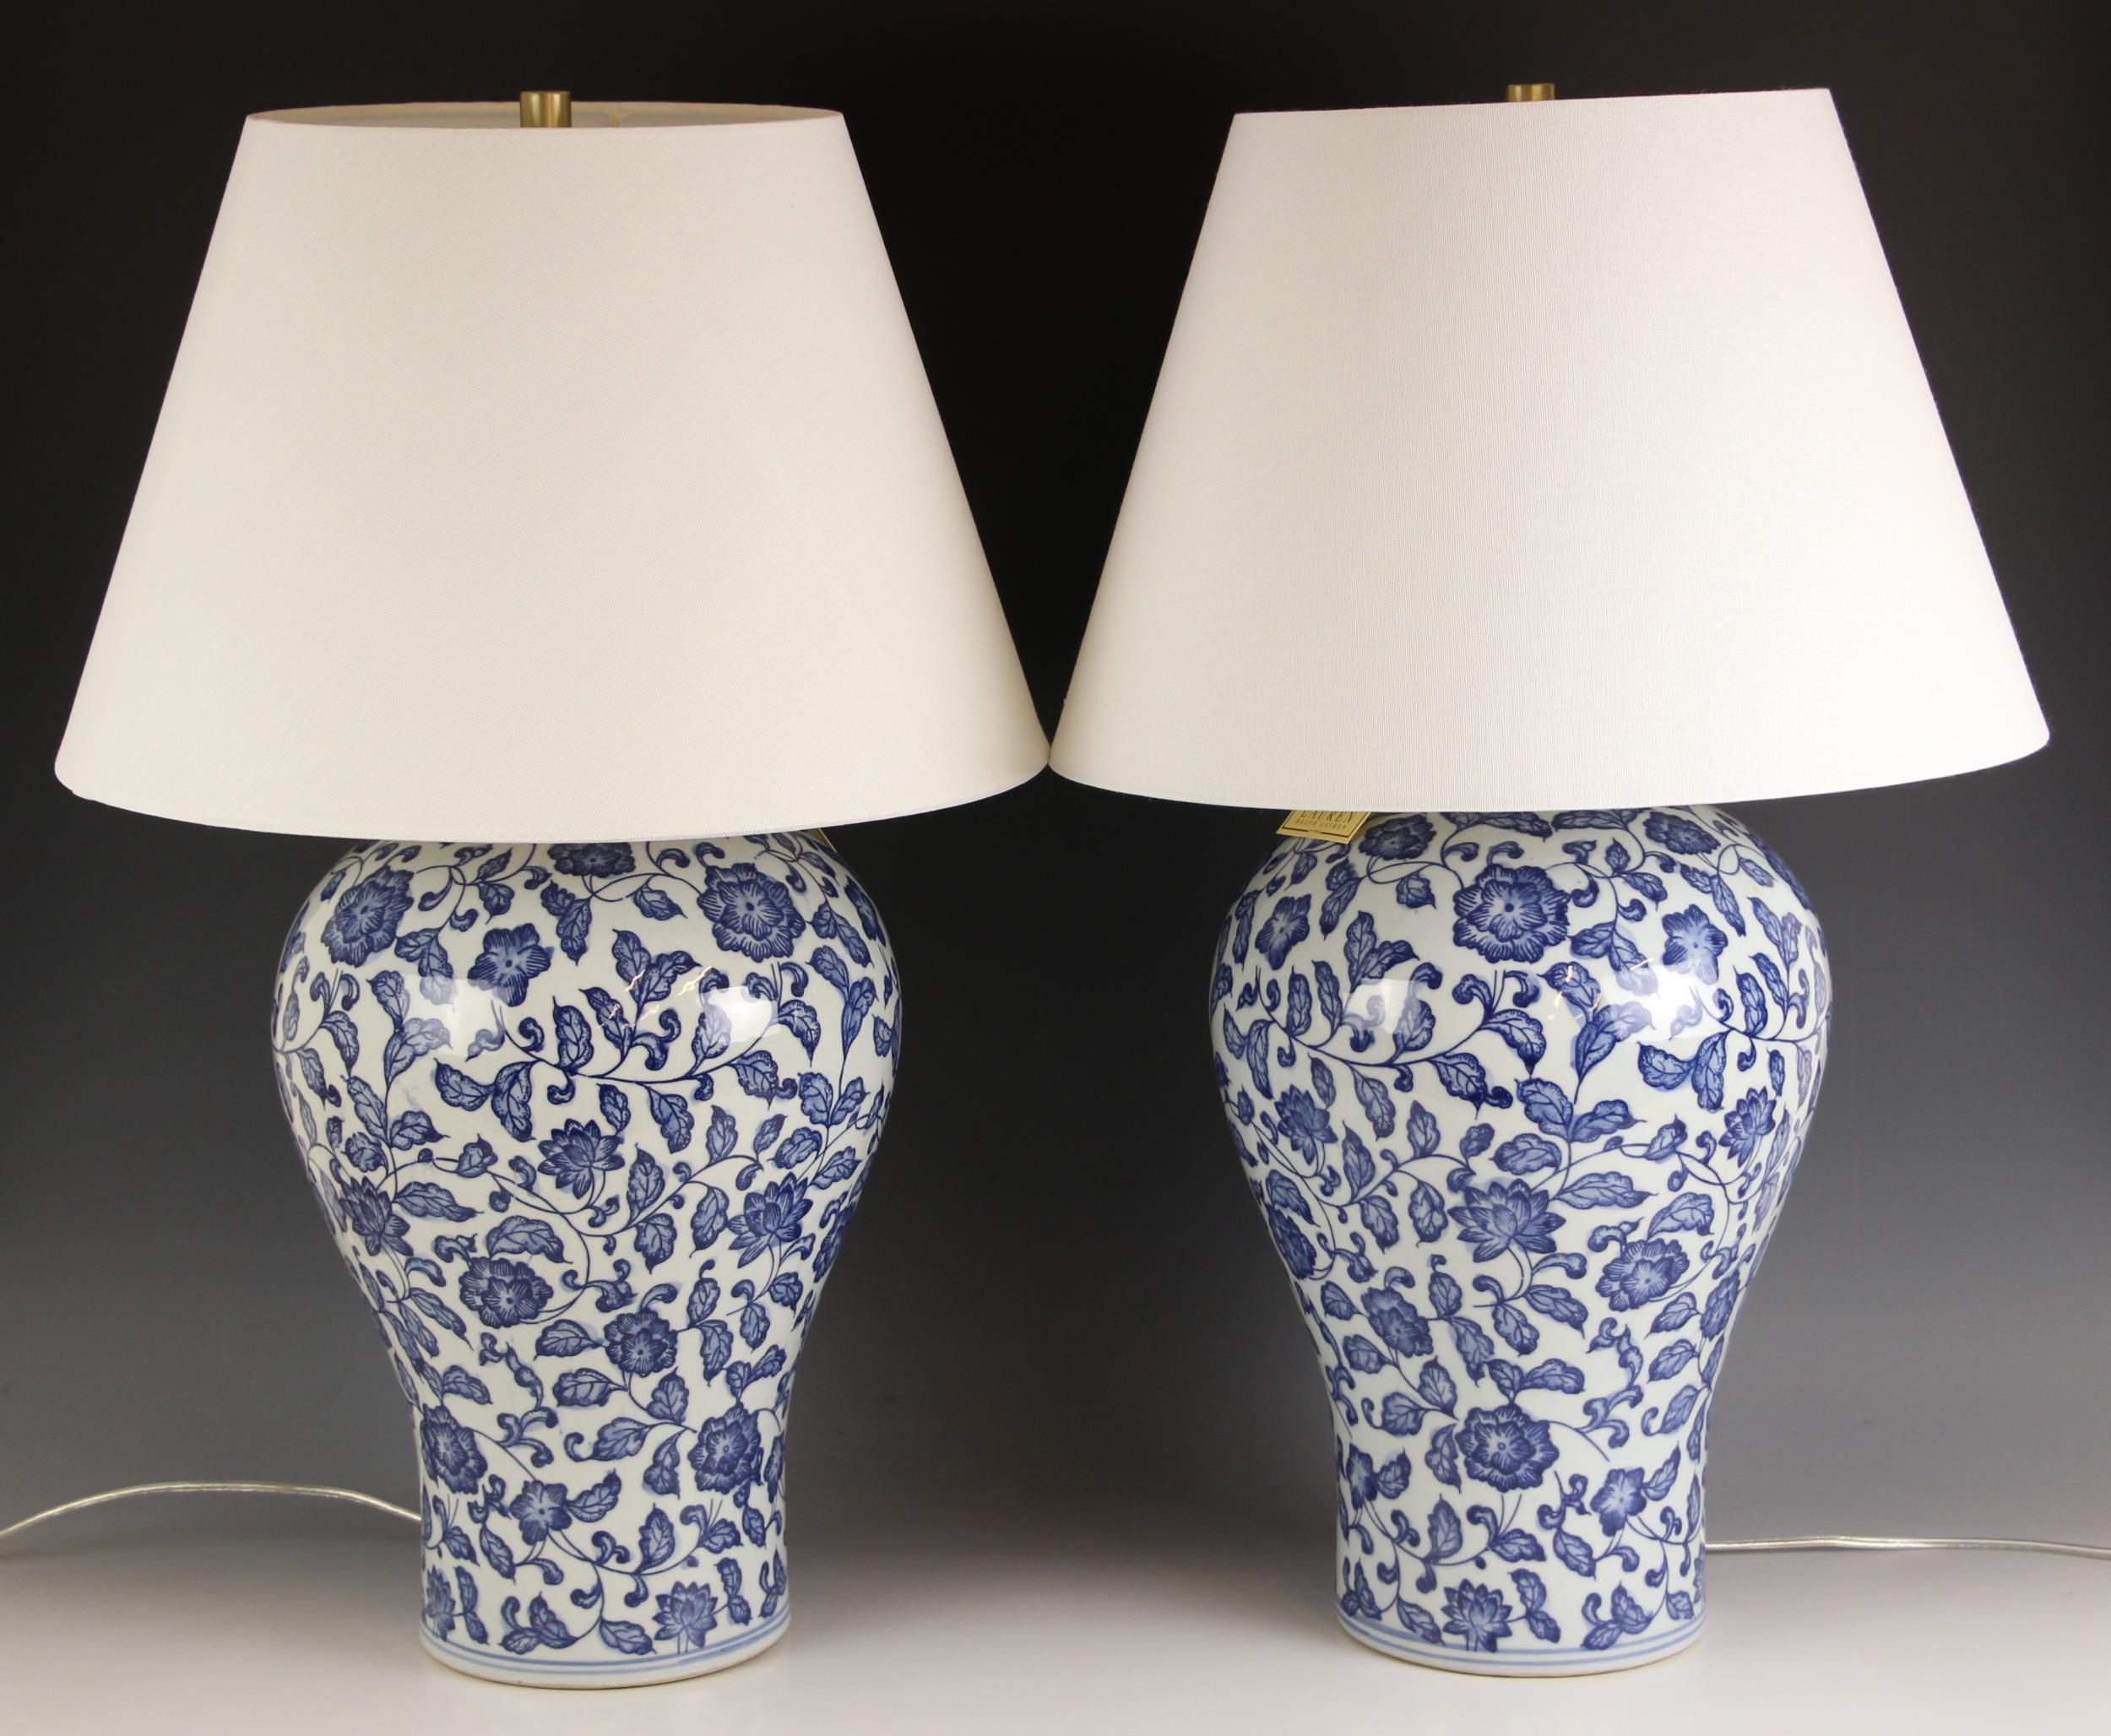 A pair of Ralph Lauren Chinese influence blue and white vase table lamps, of baluster form with